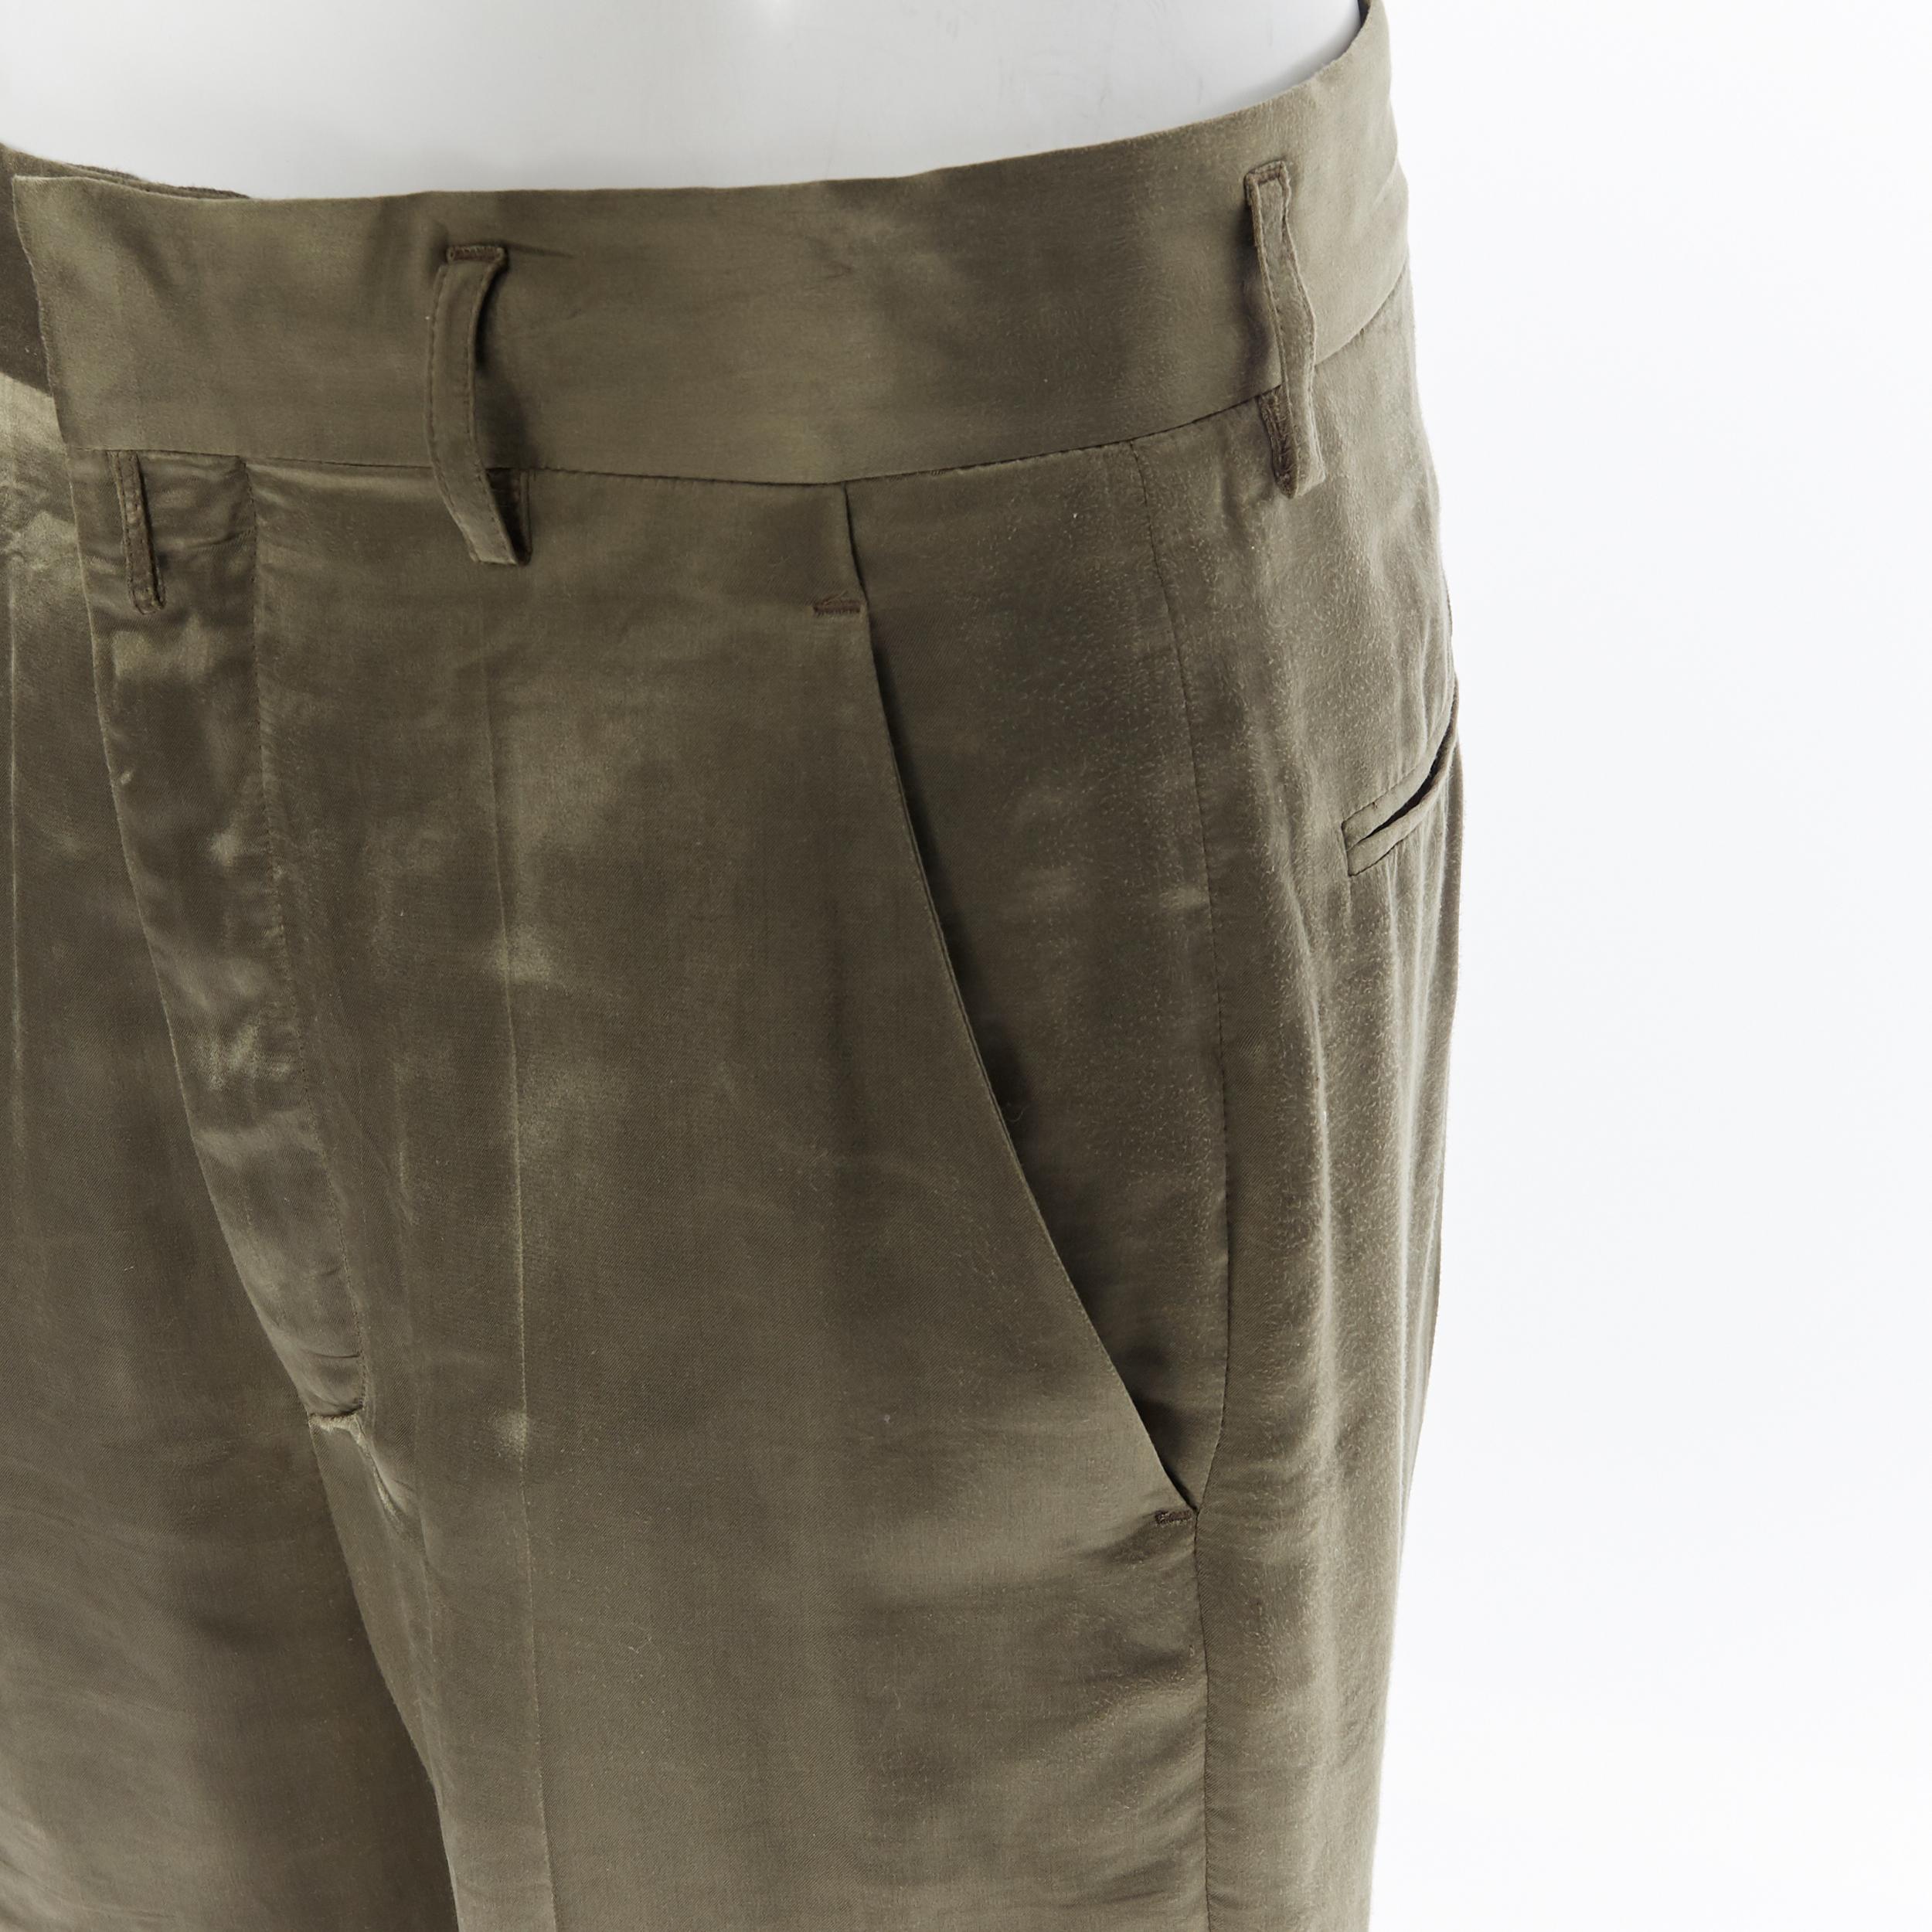 HAIDER ACKERMANN 100% polyester green dropped crotch cropped pants  FR36
Brand: Haider Ackermann
Designer: Haider Ackermann
Model Name / Style: Dropped crotch pants
Material: Polyester
Color: Green
Pattern: Solid
Closure: Zip
Extra Detail:
Made in: